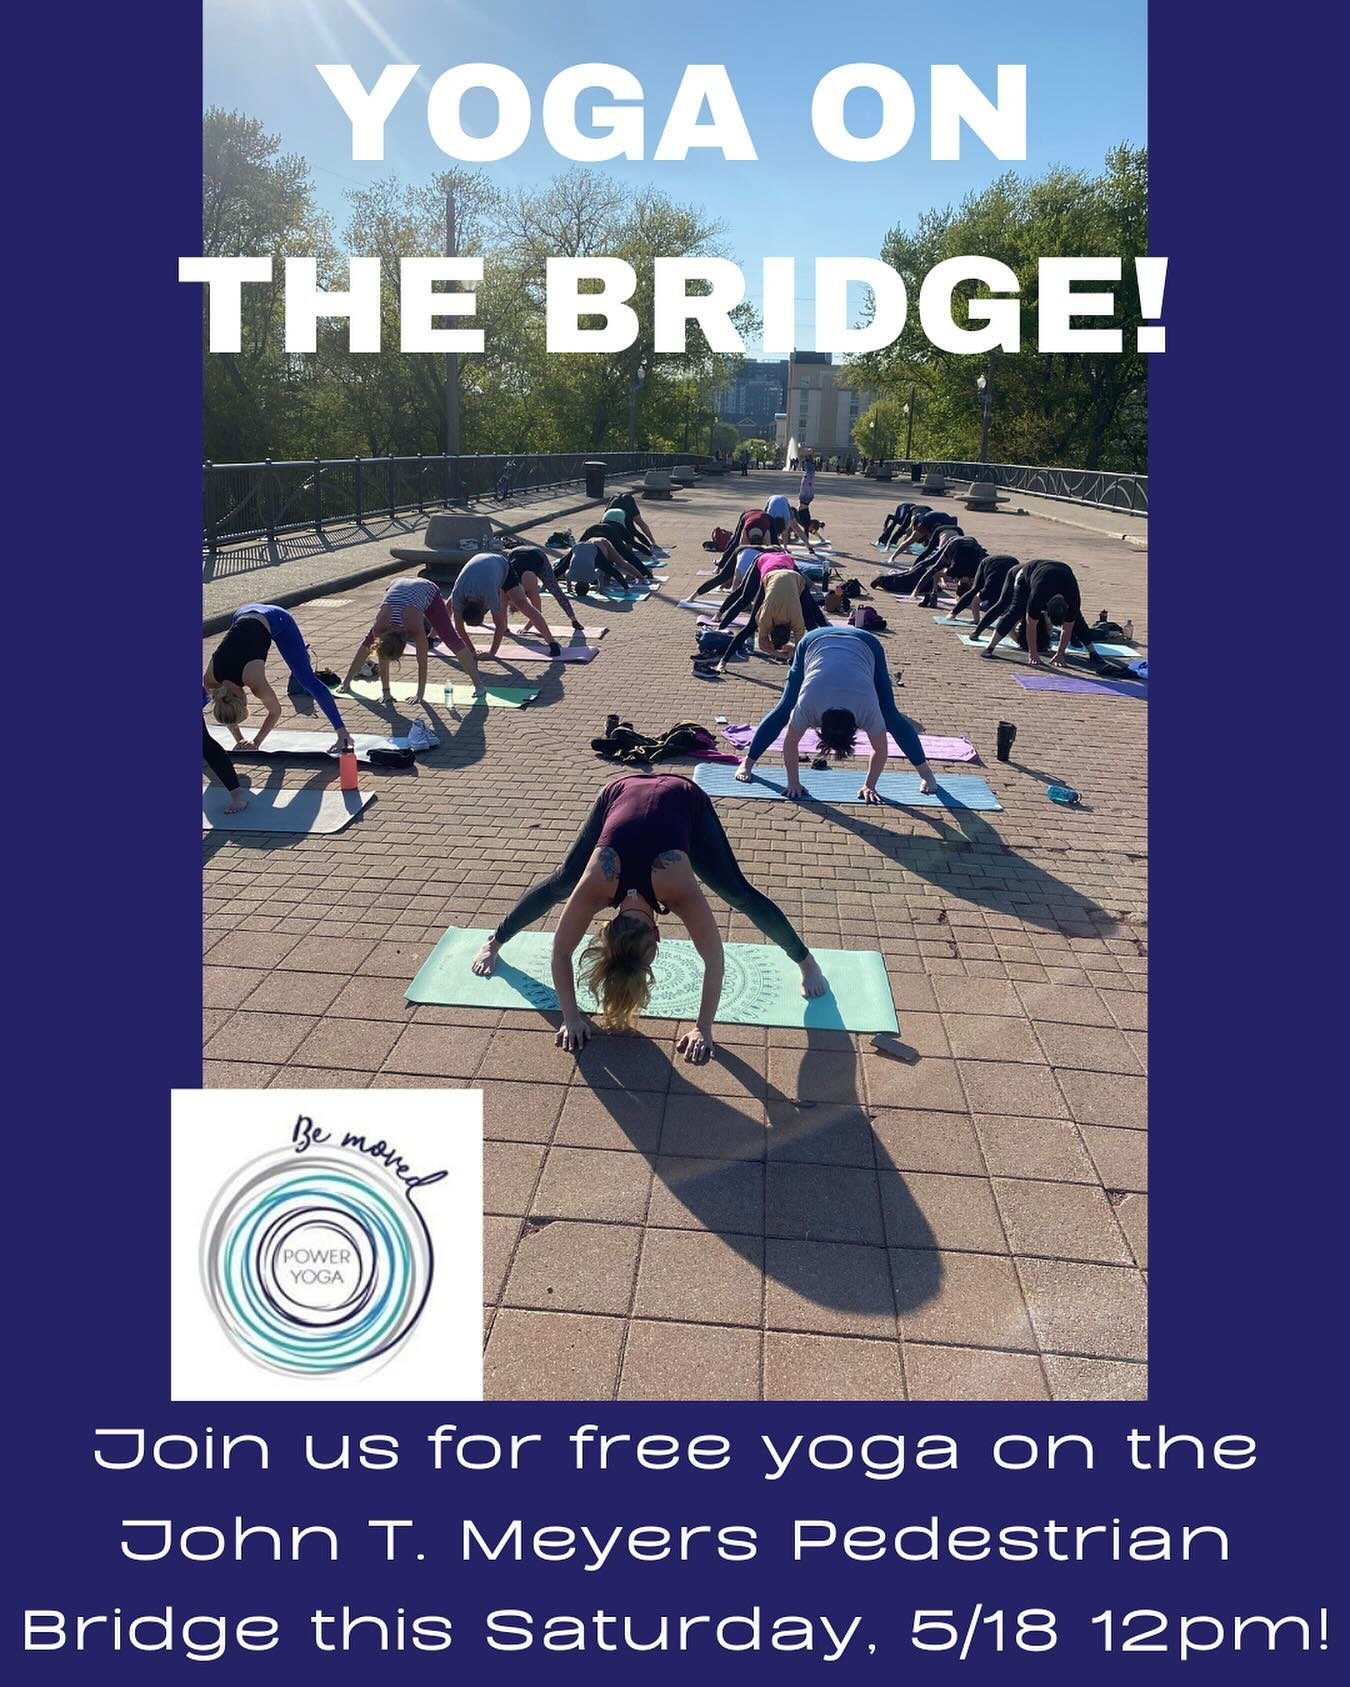 It&rsquo;s our 8th Annual Year of bringing free yoga on the bridge to our community! We are so excited to see YOU this Saturday at 12 noon! Anita will be there to welcome you!